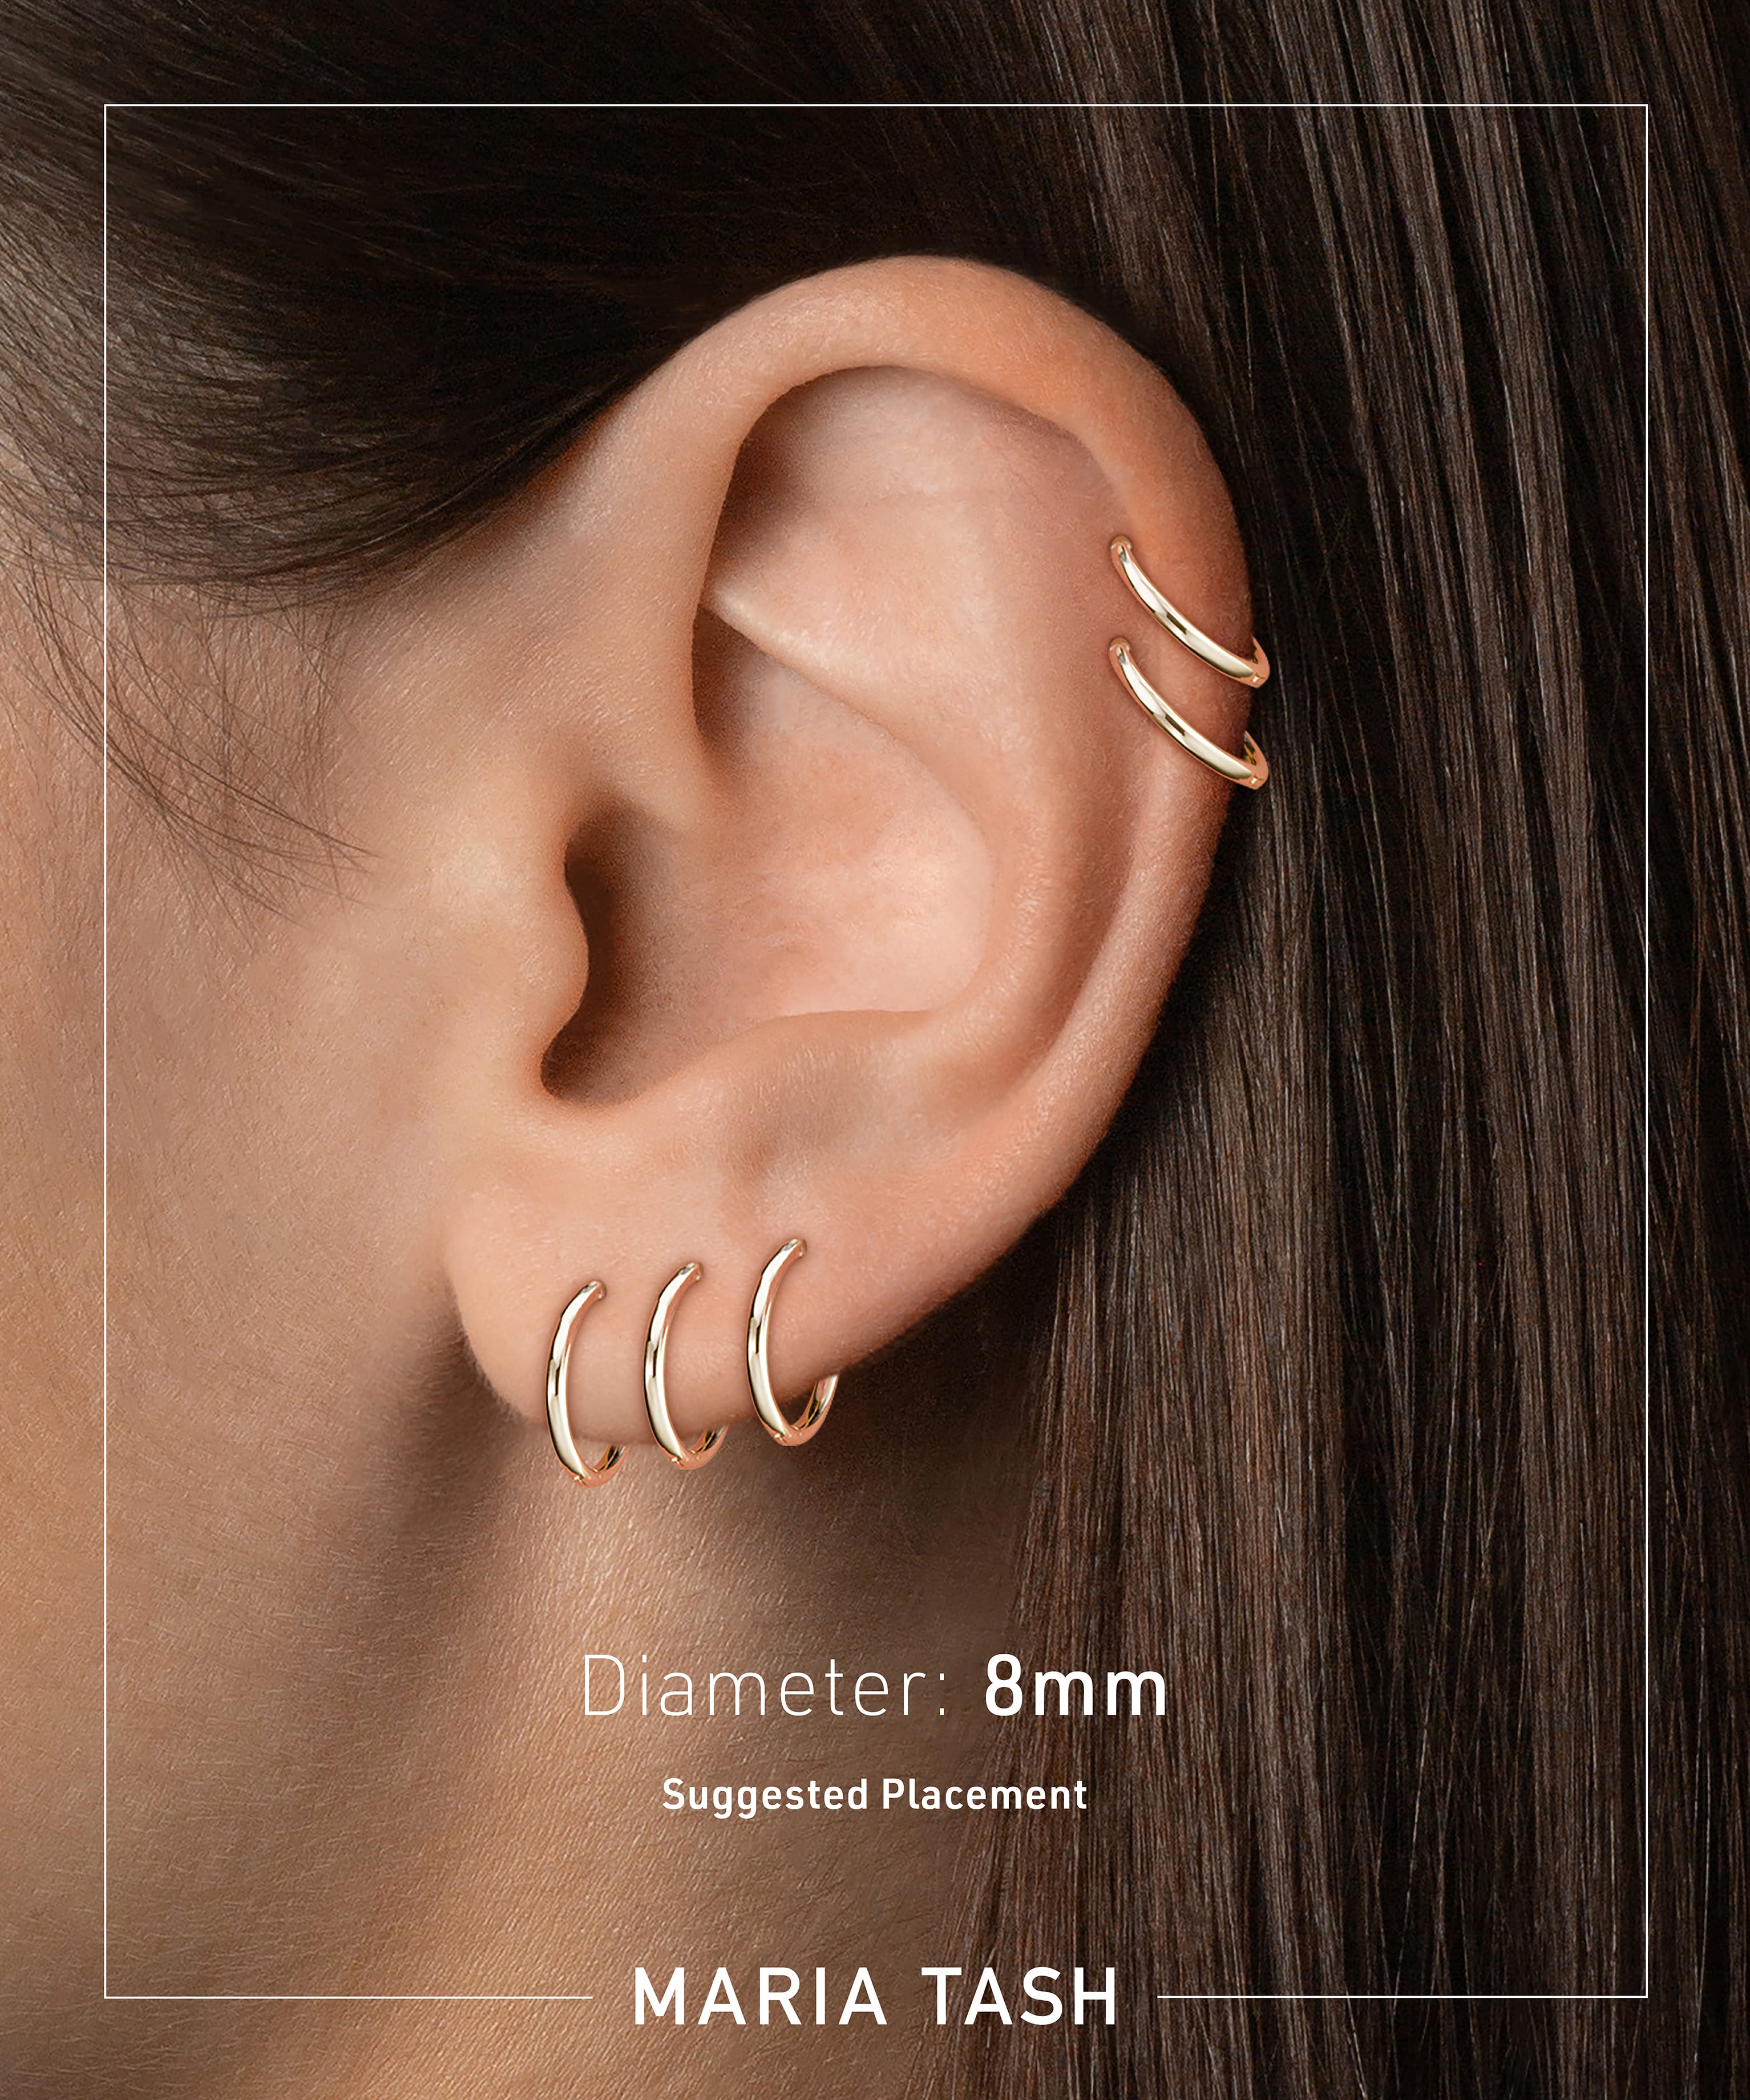 Suggested earlobe or cartilage placement for 8mm hoop earring size guide